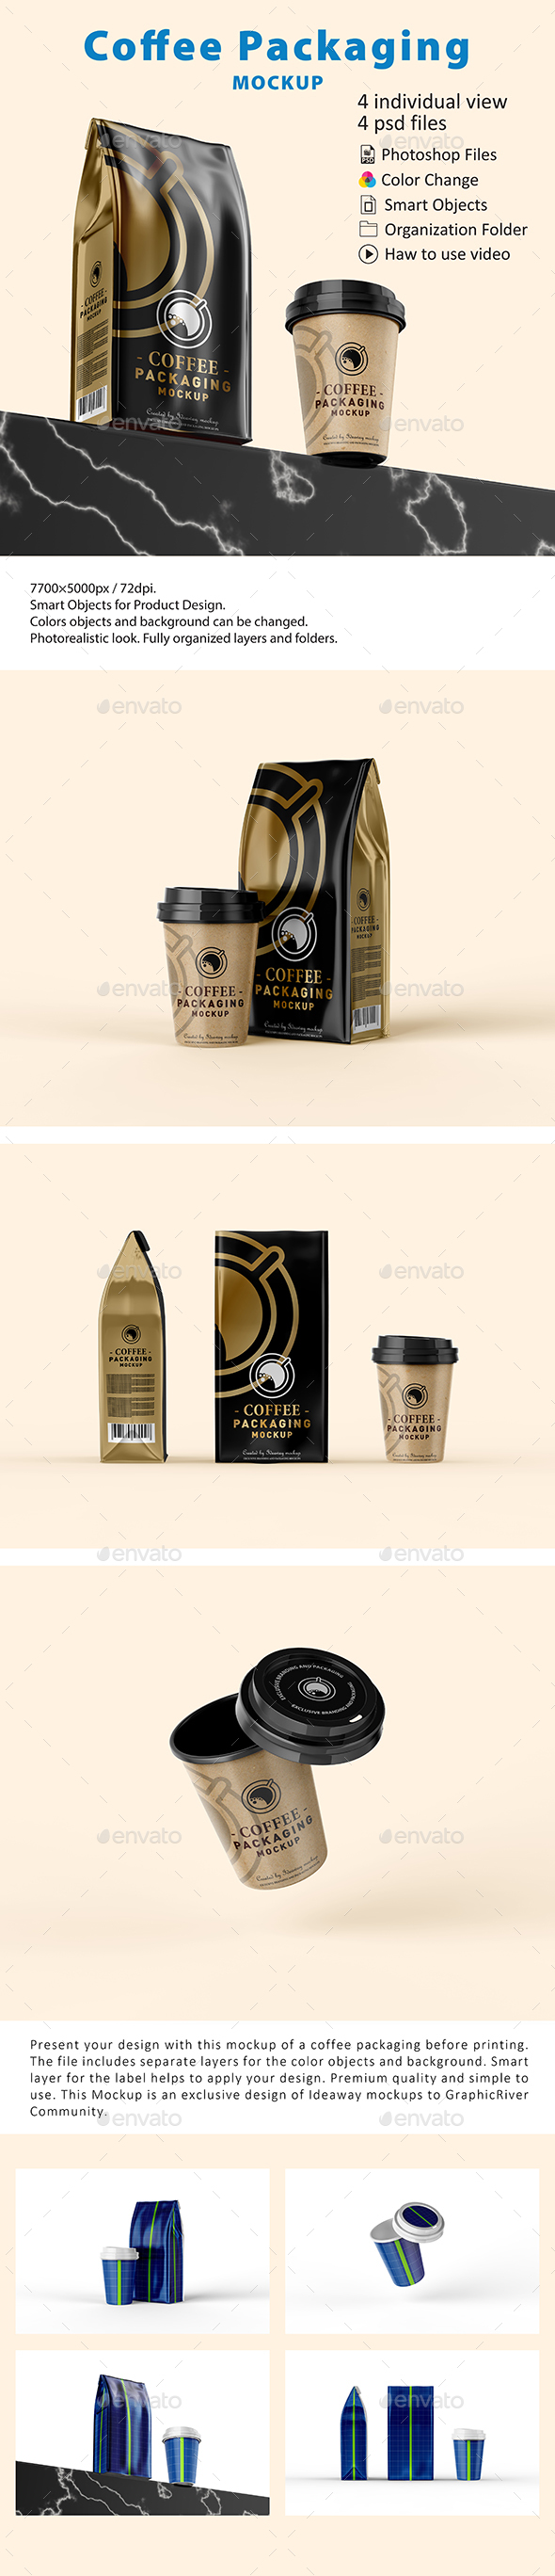 Download Coffee Packaging Mockup By Idaeway Graphicriver